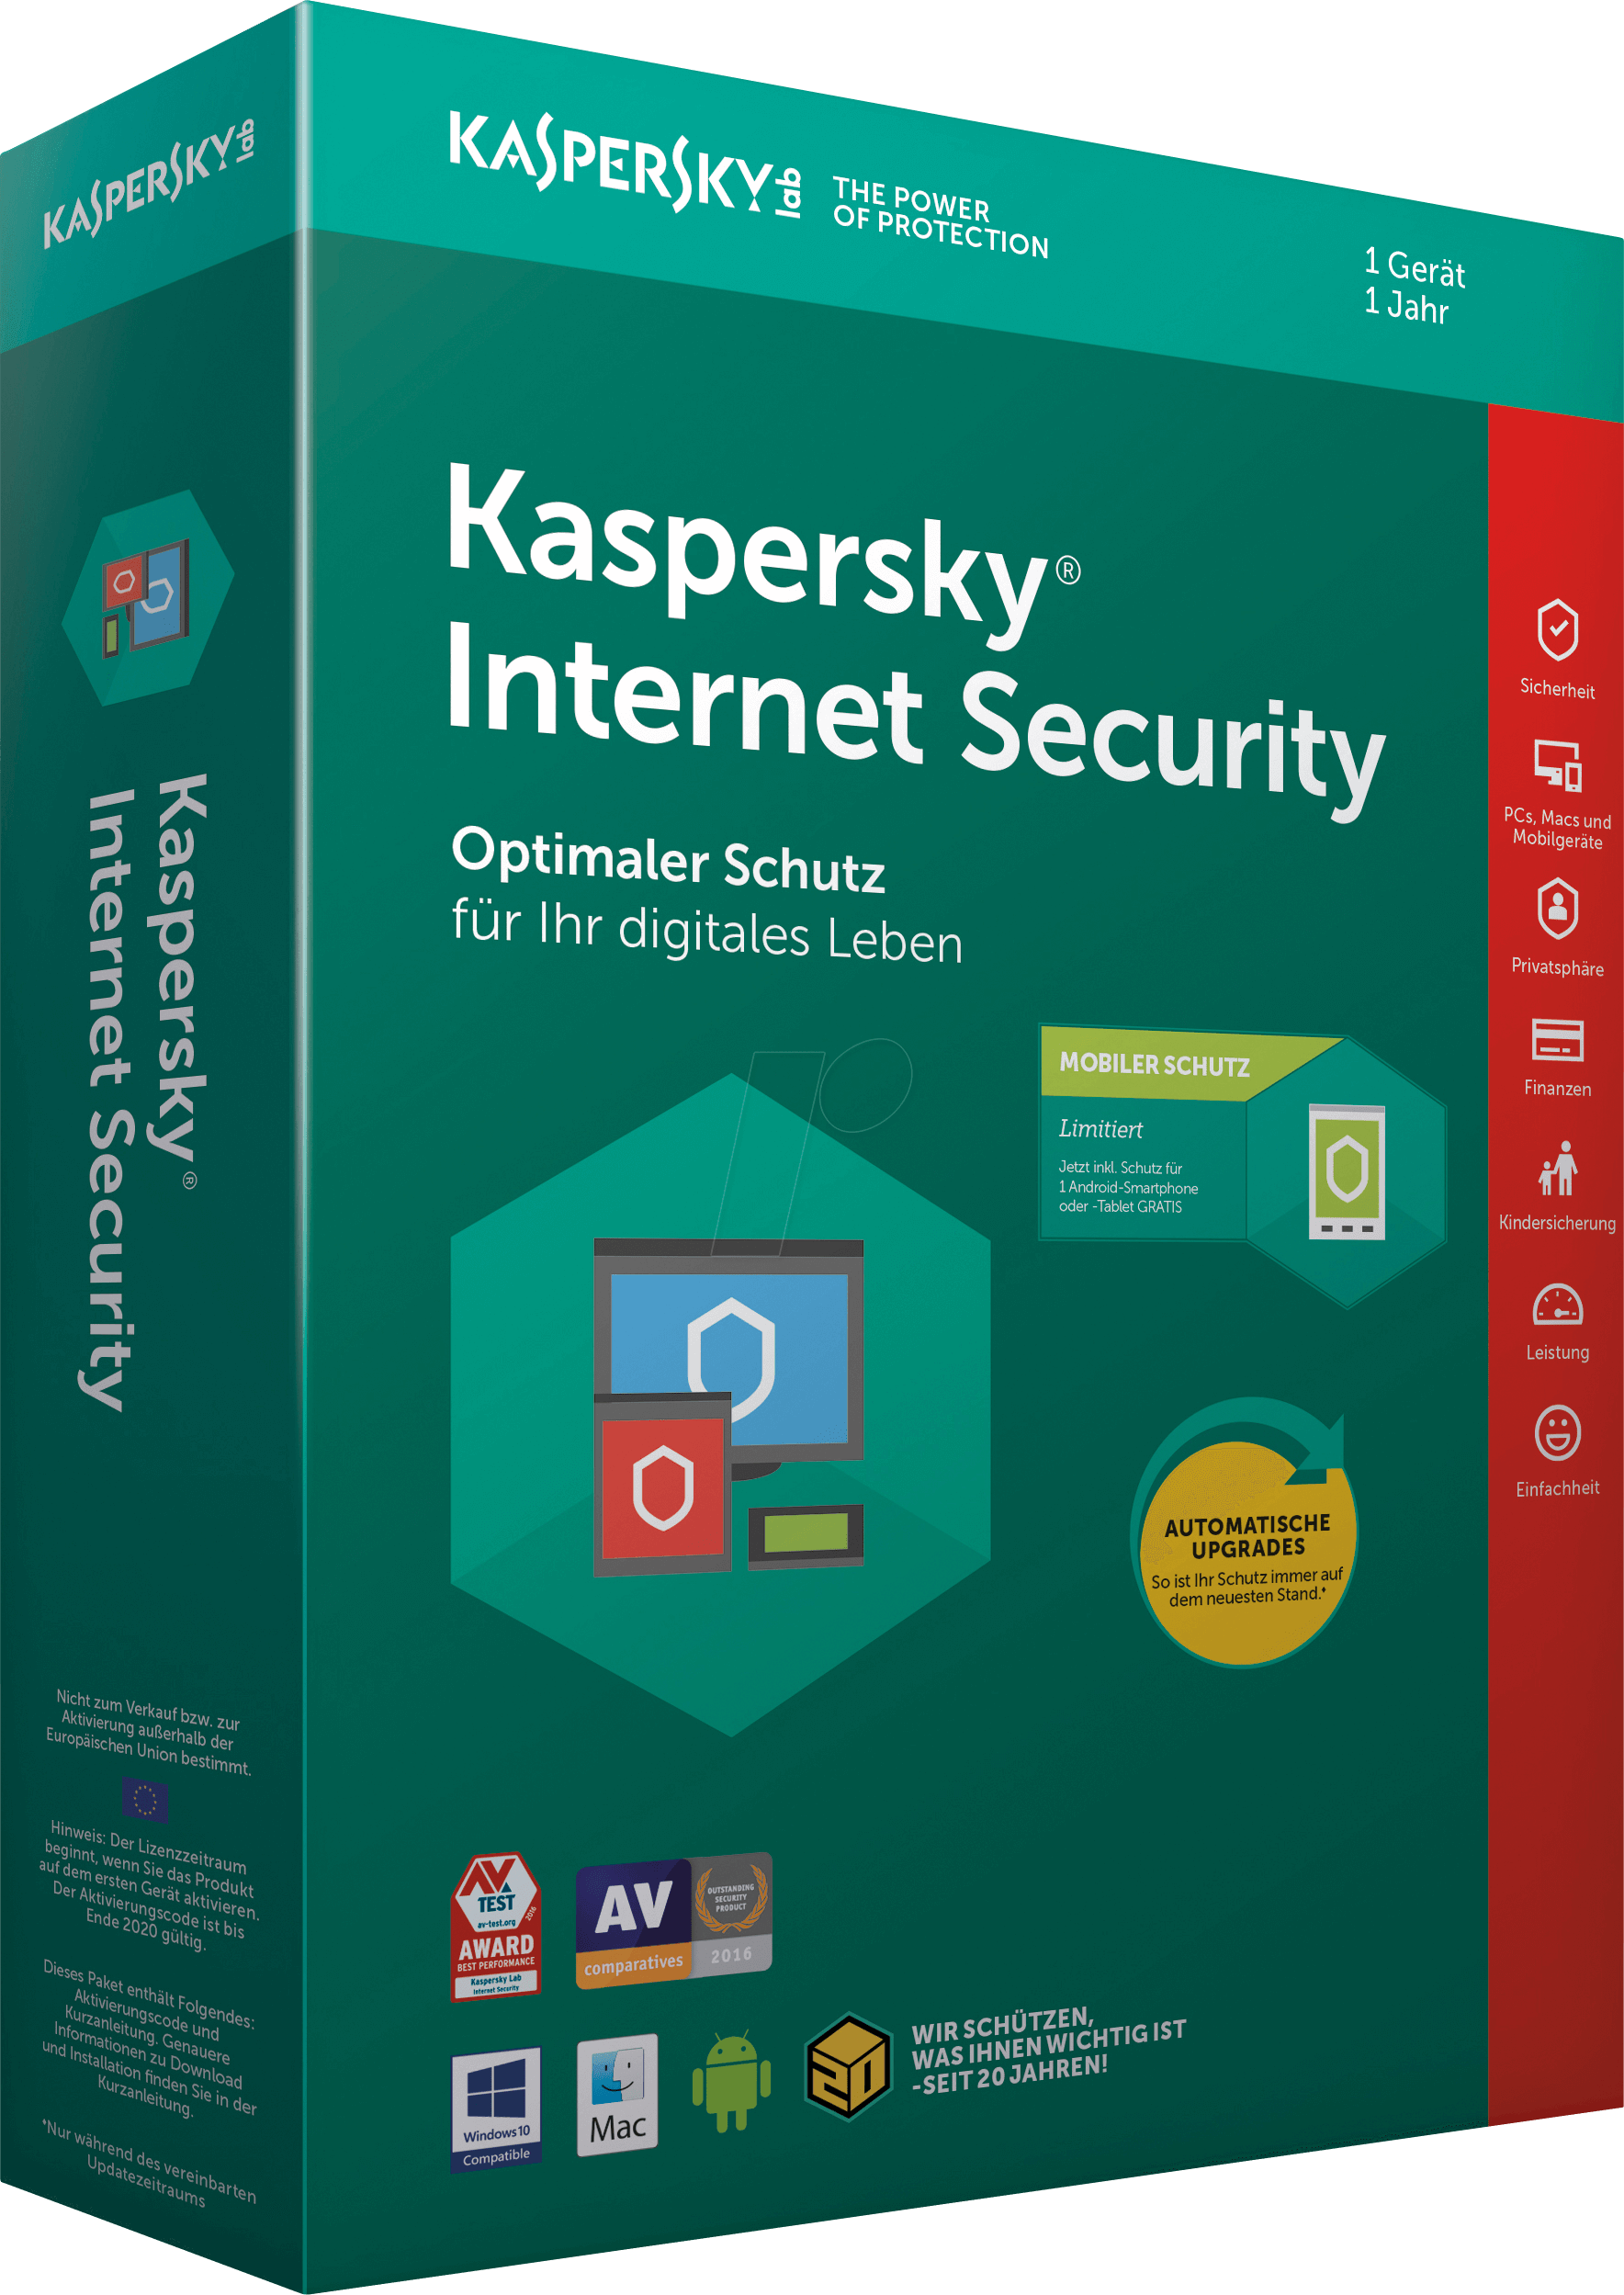 Kaspersky 2018 Logo - KAS IS2018 AND: Kaspersky Internet Security 2018 + Android Sec. at